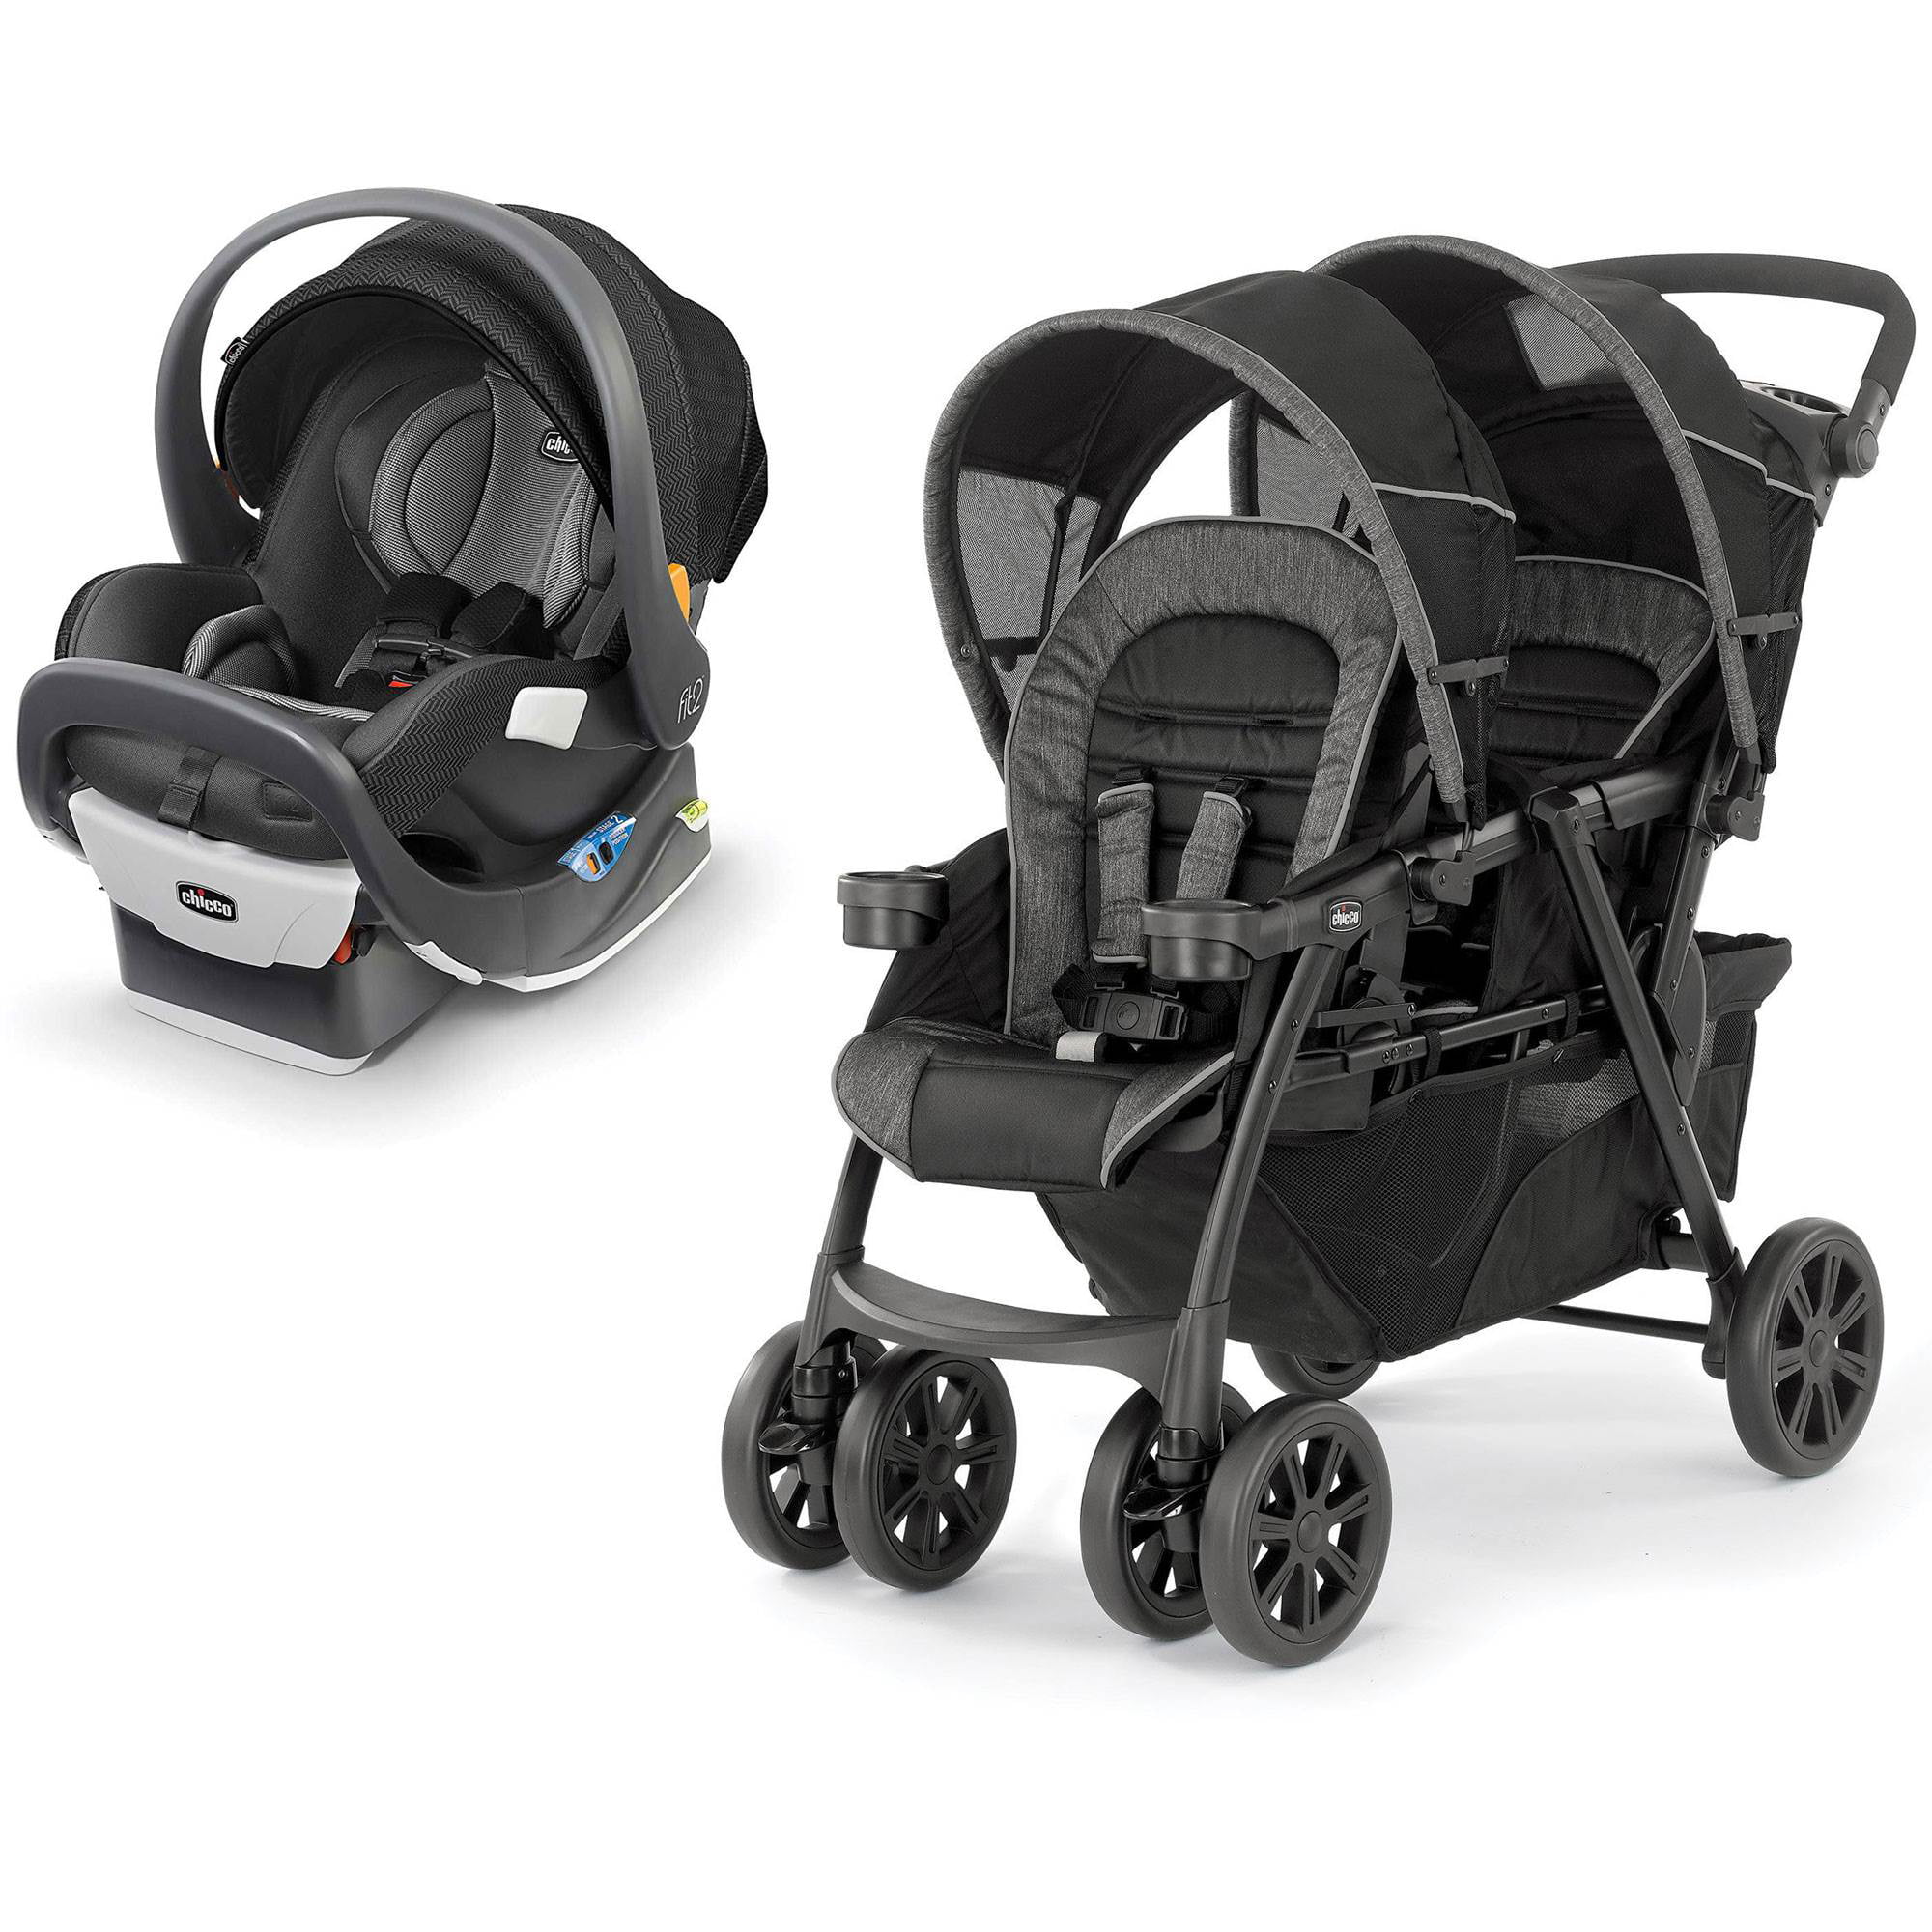 How to Choose the Right Walmart Car Seat Stroller for your Child{null}